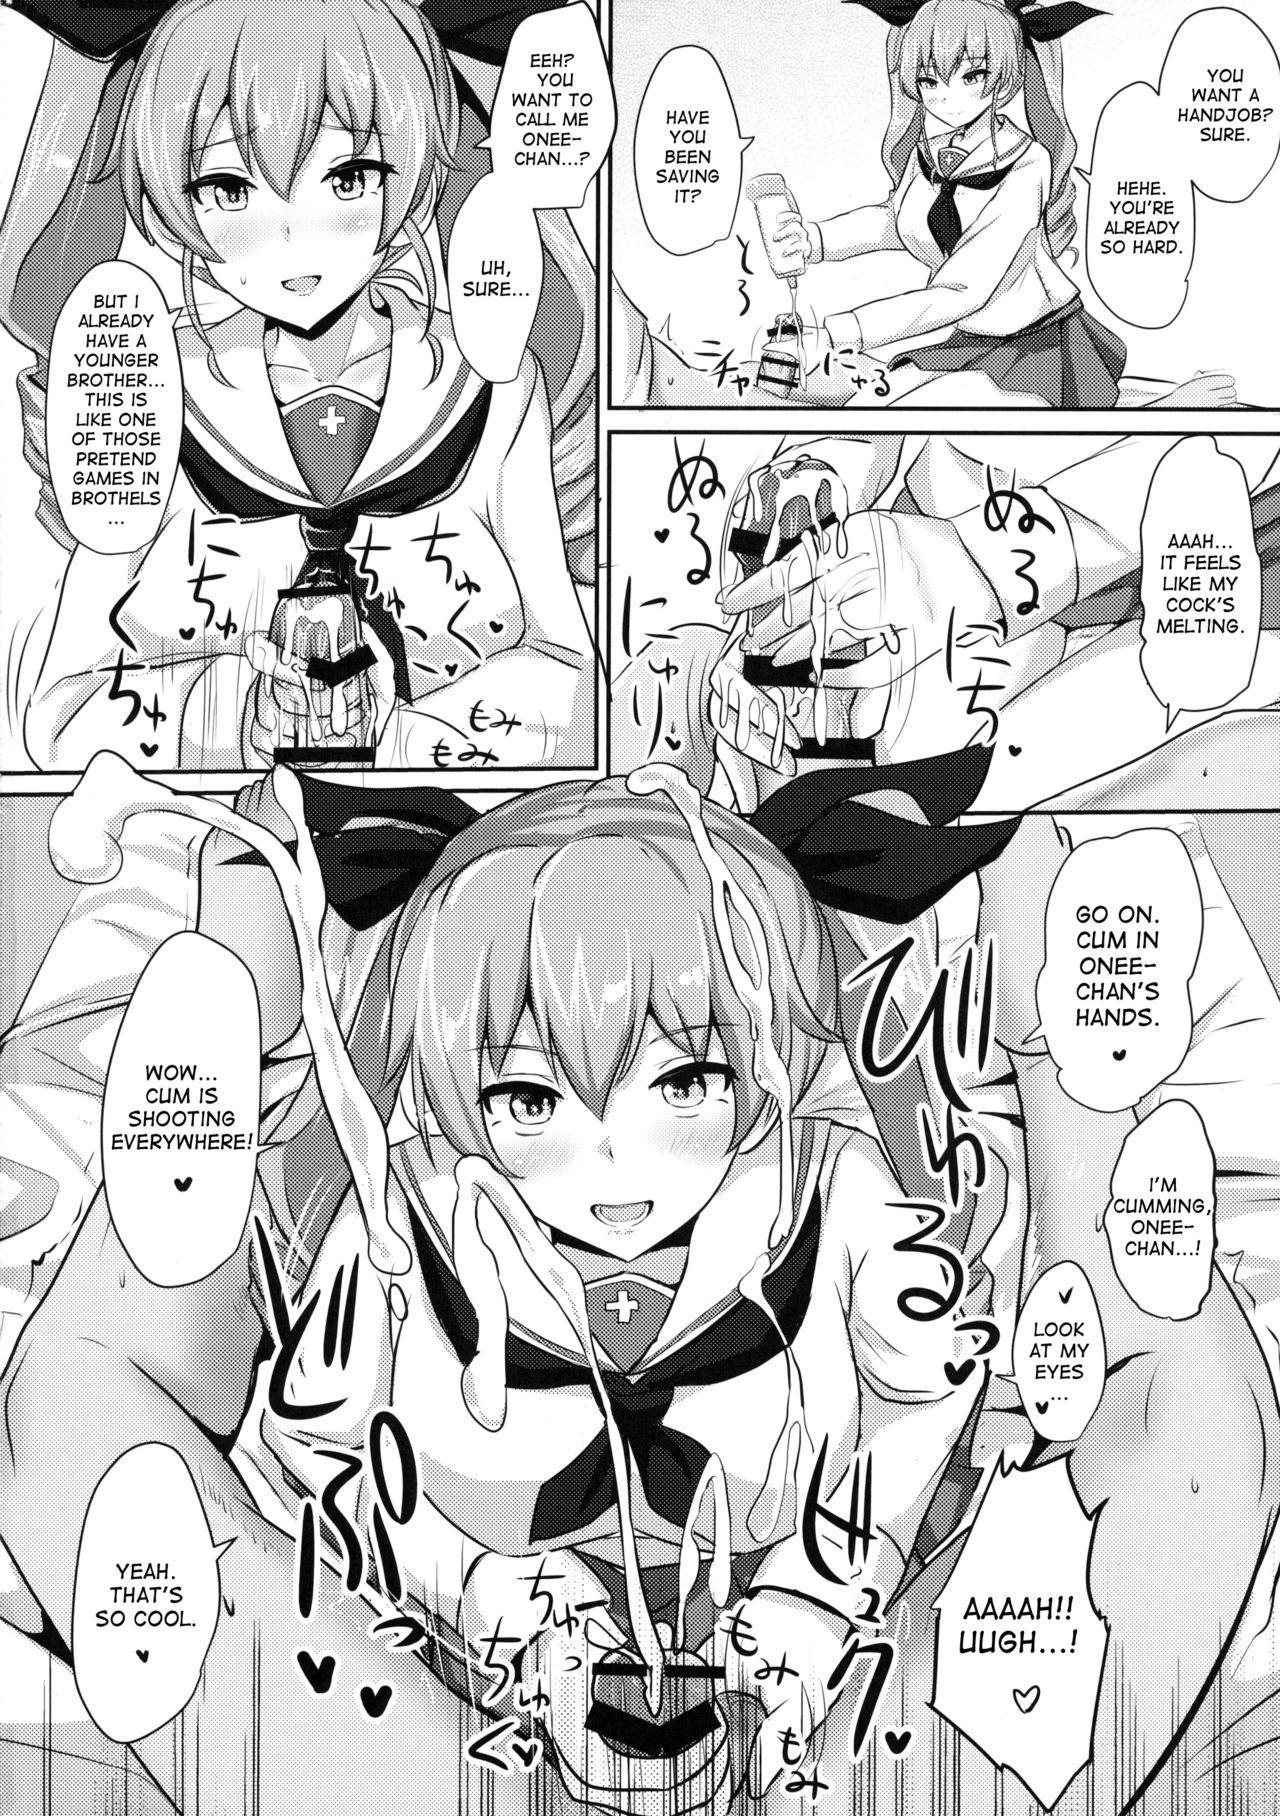 Real Amateur Anchovy Nee-san White Sauce Zoe - Girls und panzer Amante - Page 5